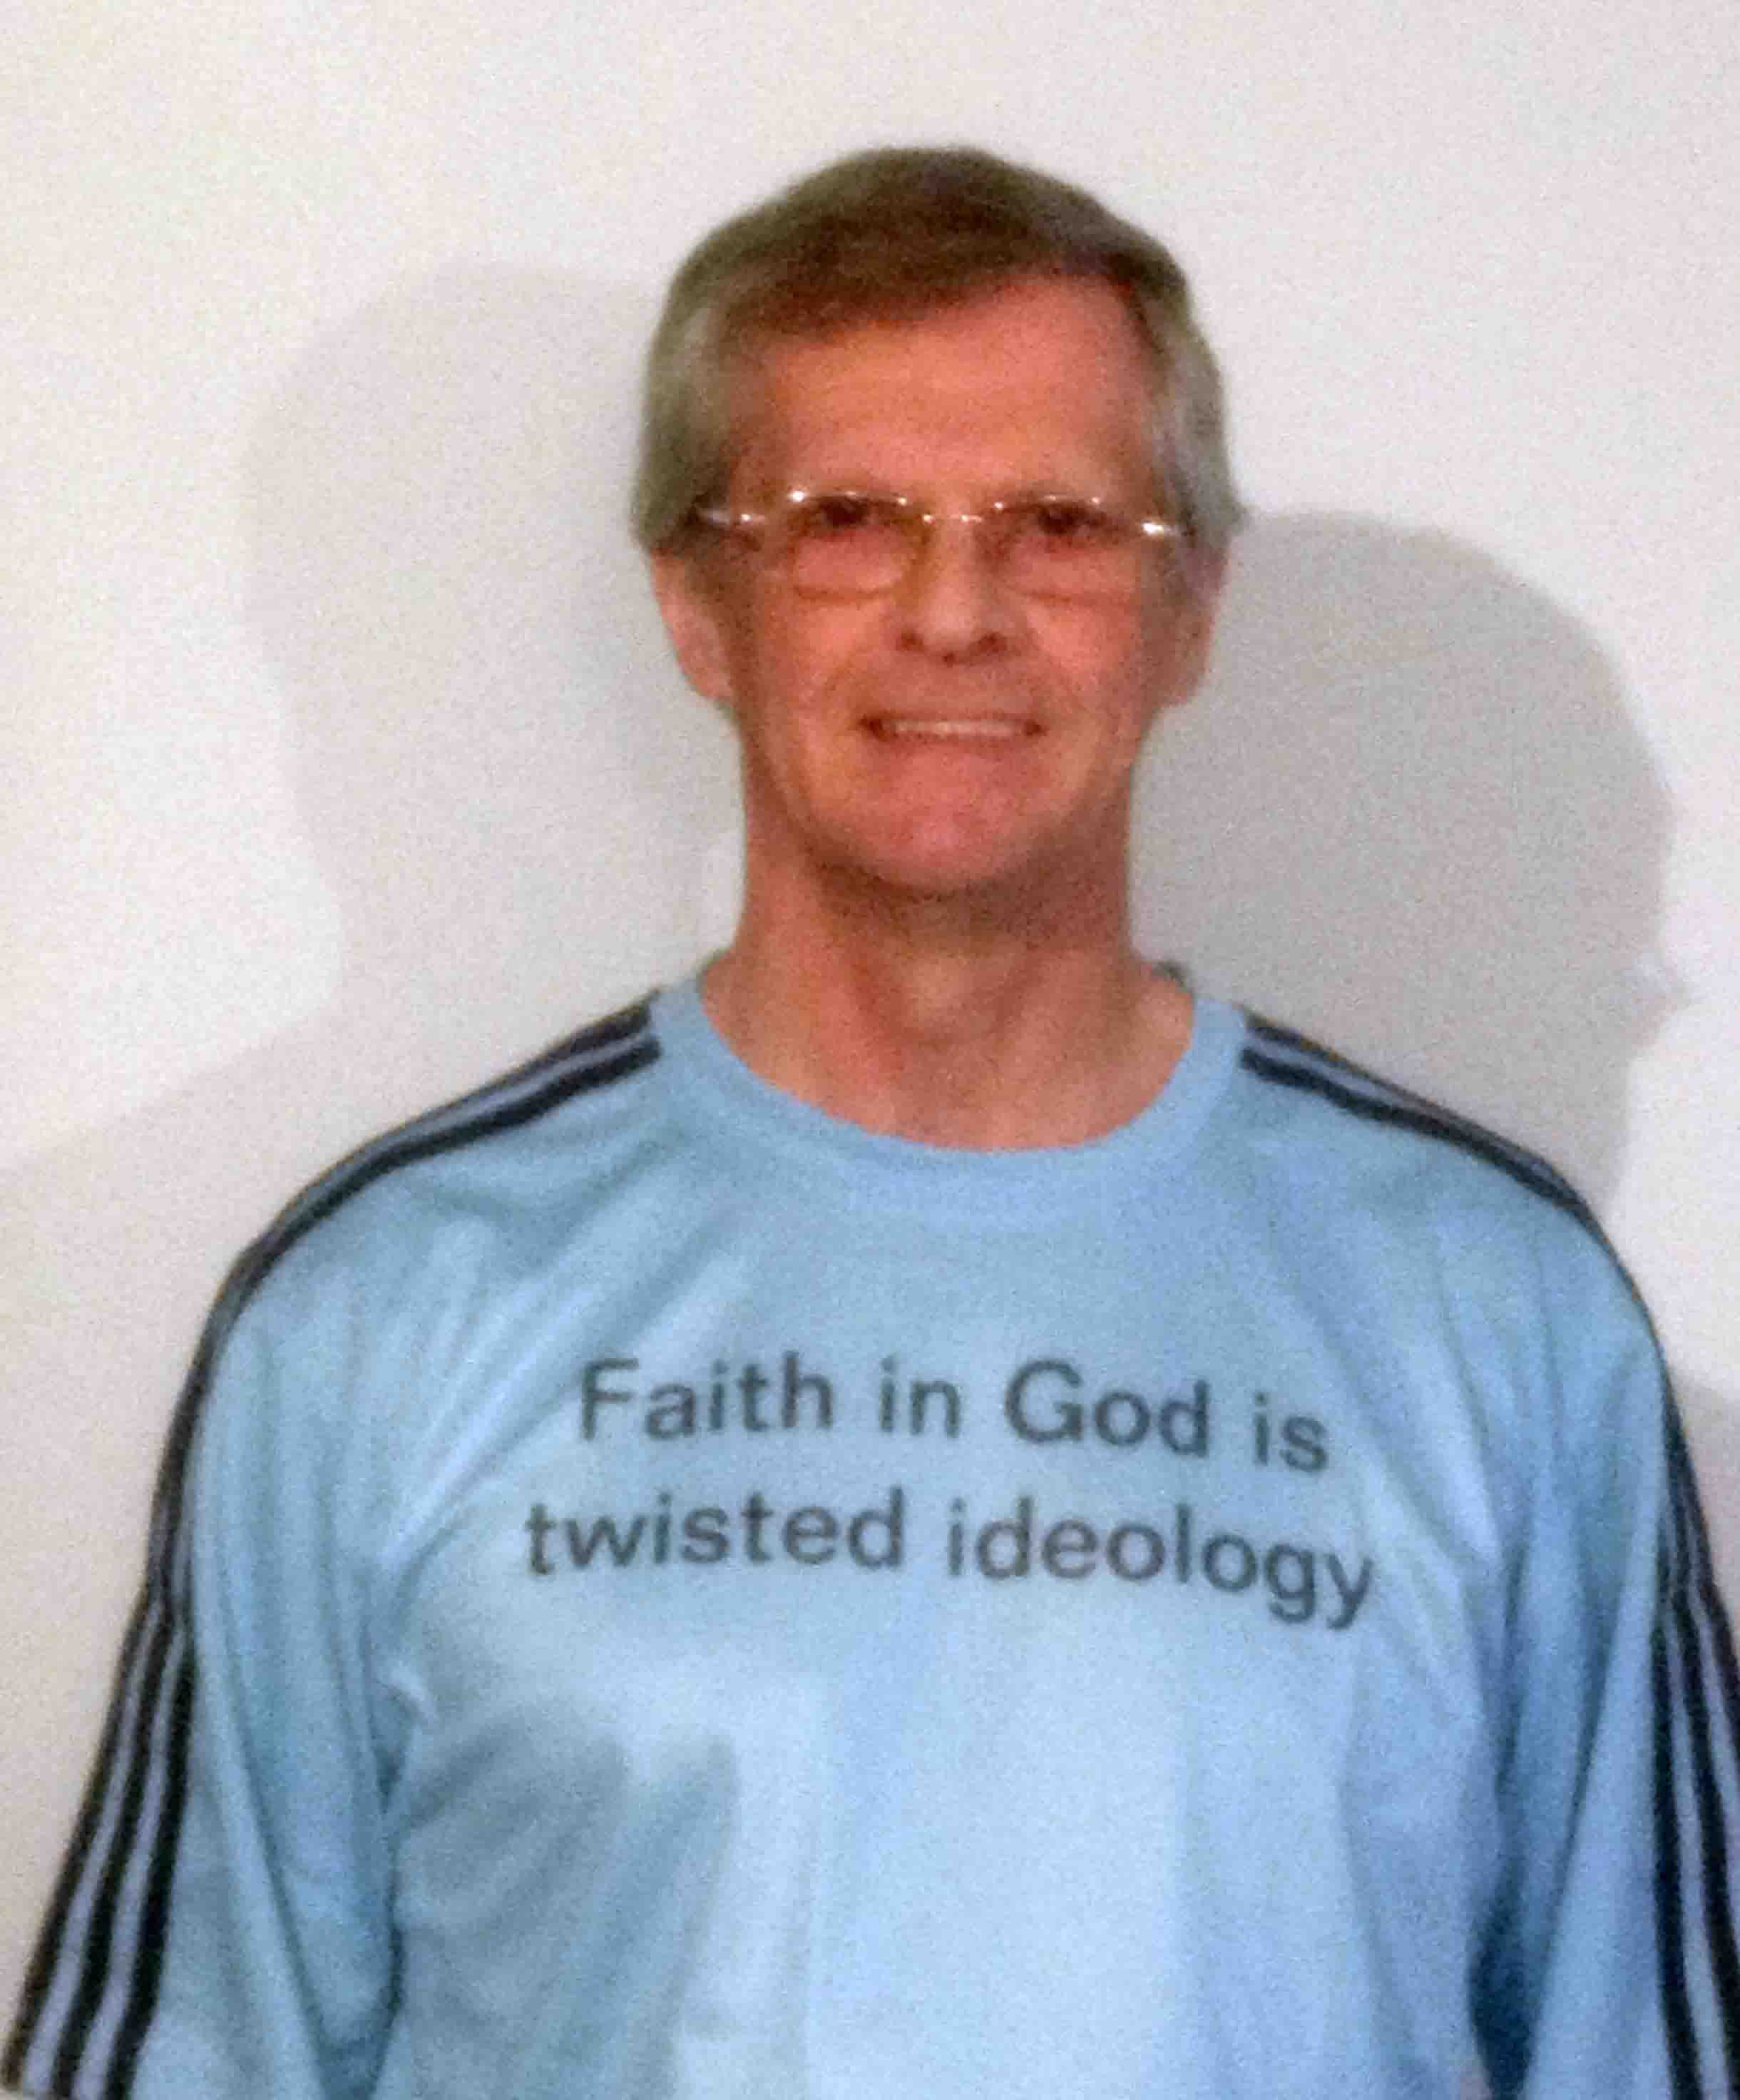 Darwin Bedford wearing his shirt that says 'Faith in God is twisted ideology'